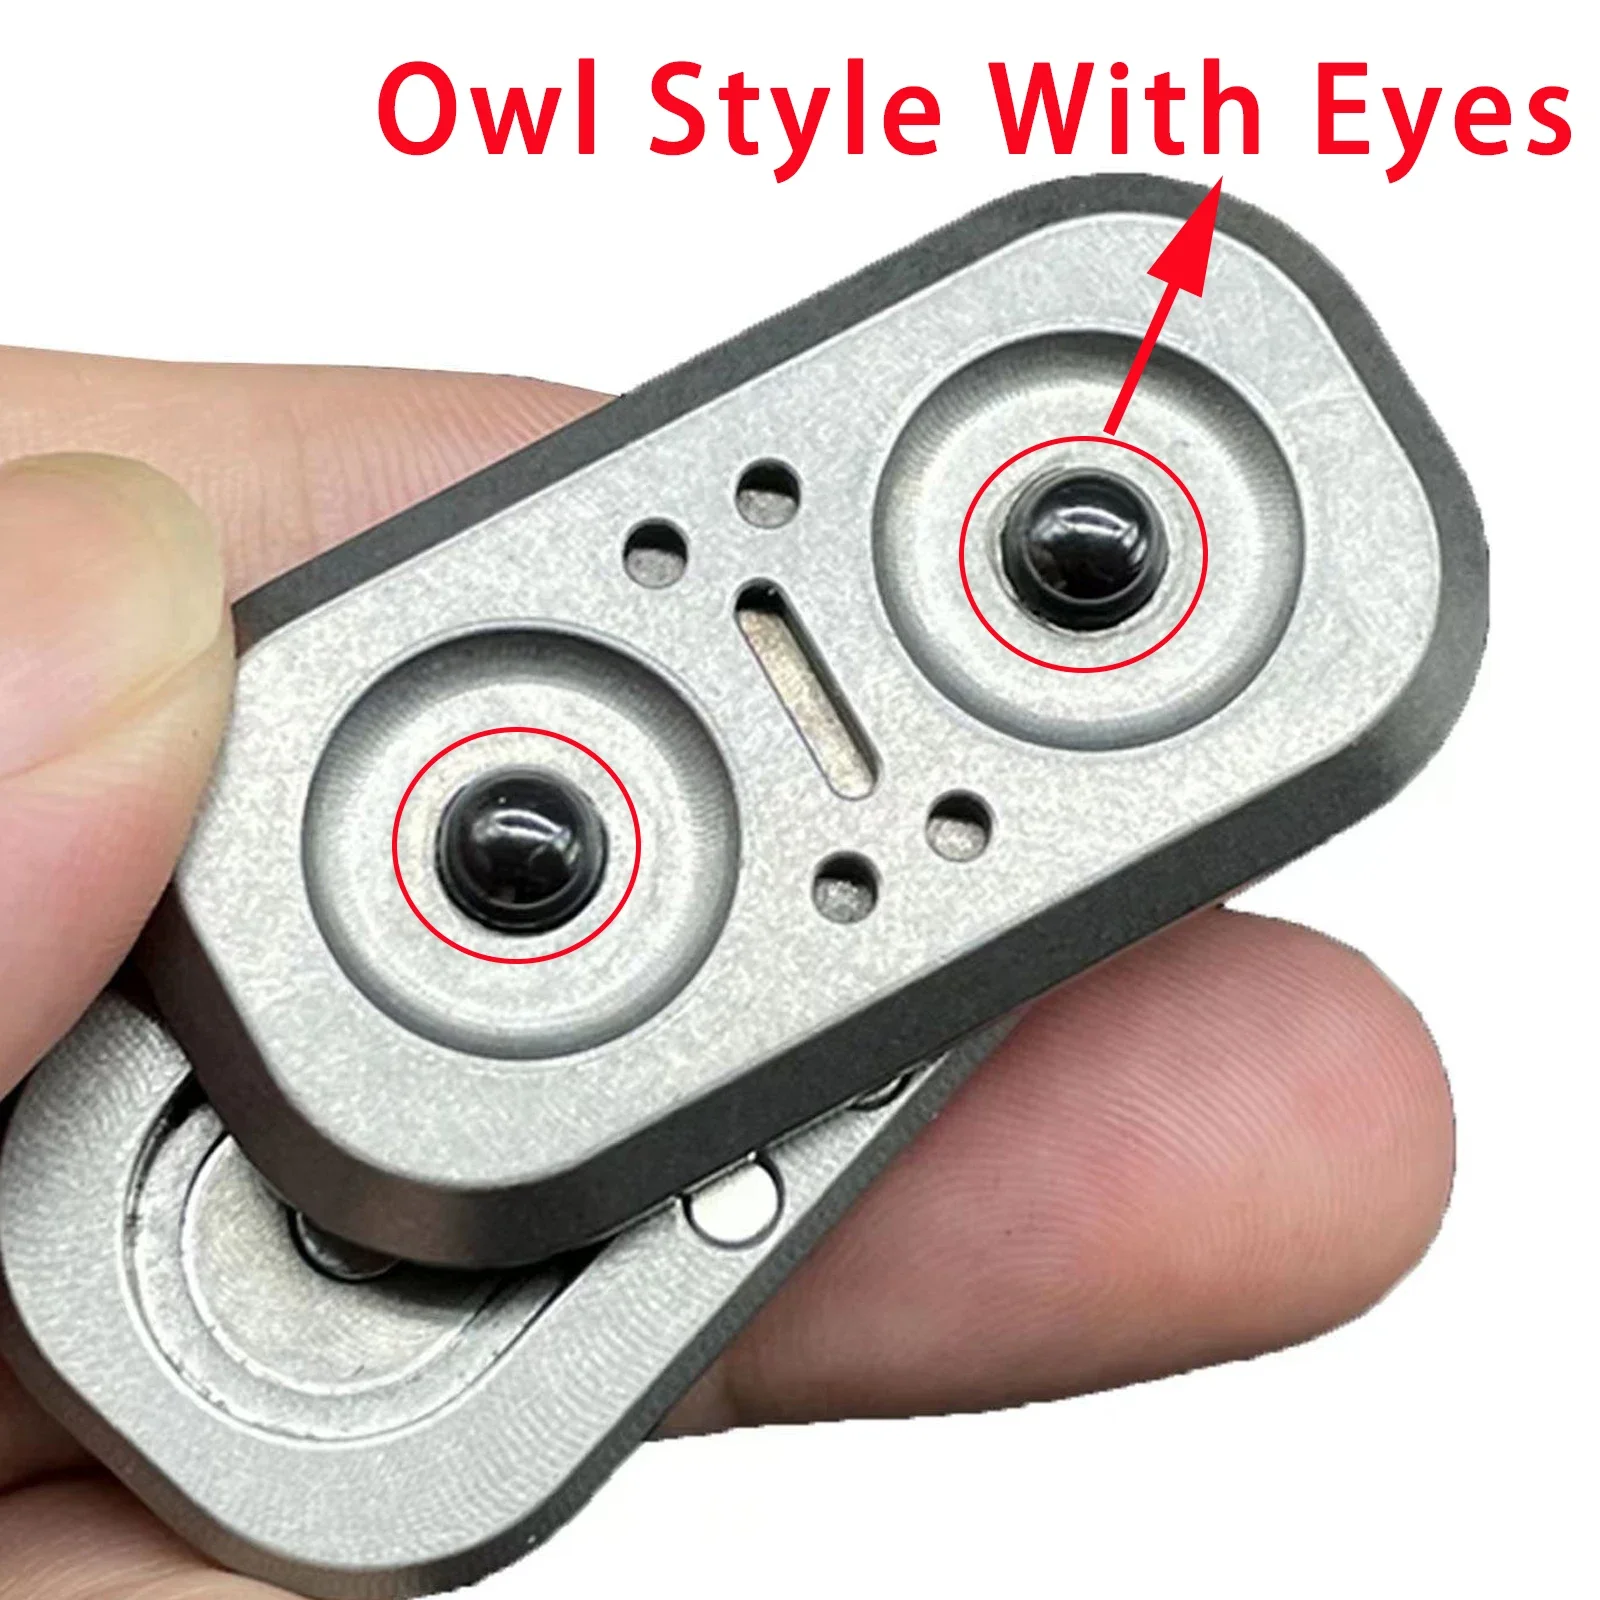 

NEW 2 in 1 Owl Fidget Slider Metal Push Spinner For Adult ADHD Hand Sensory EDC Fidget Toys Office Desk Anxiety Stress Relief